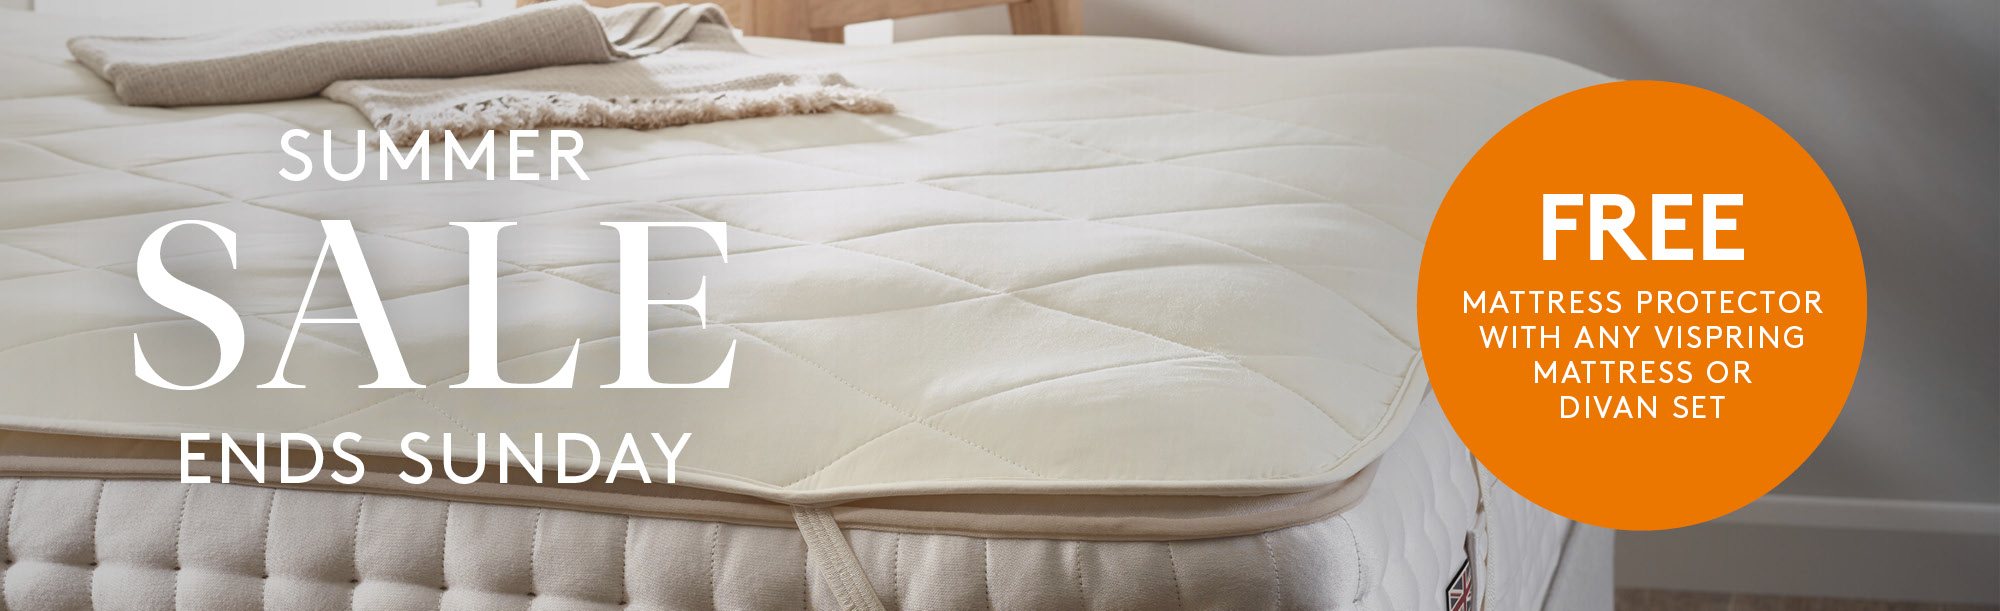 And So To Bed Summer Sale Offer Free Vispring Mattress Protector